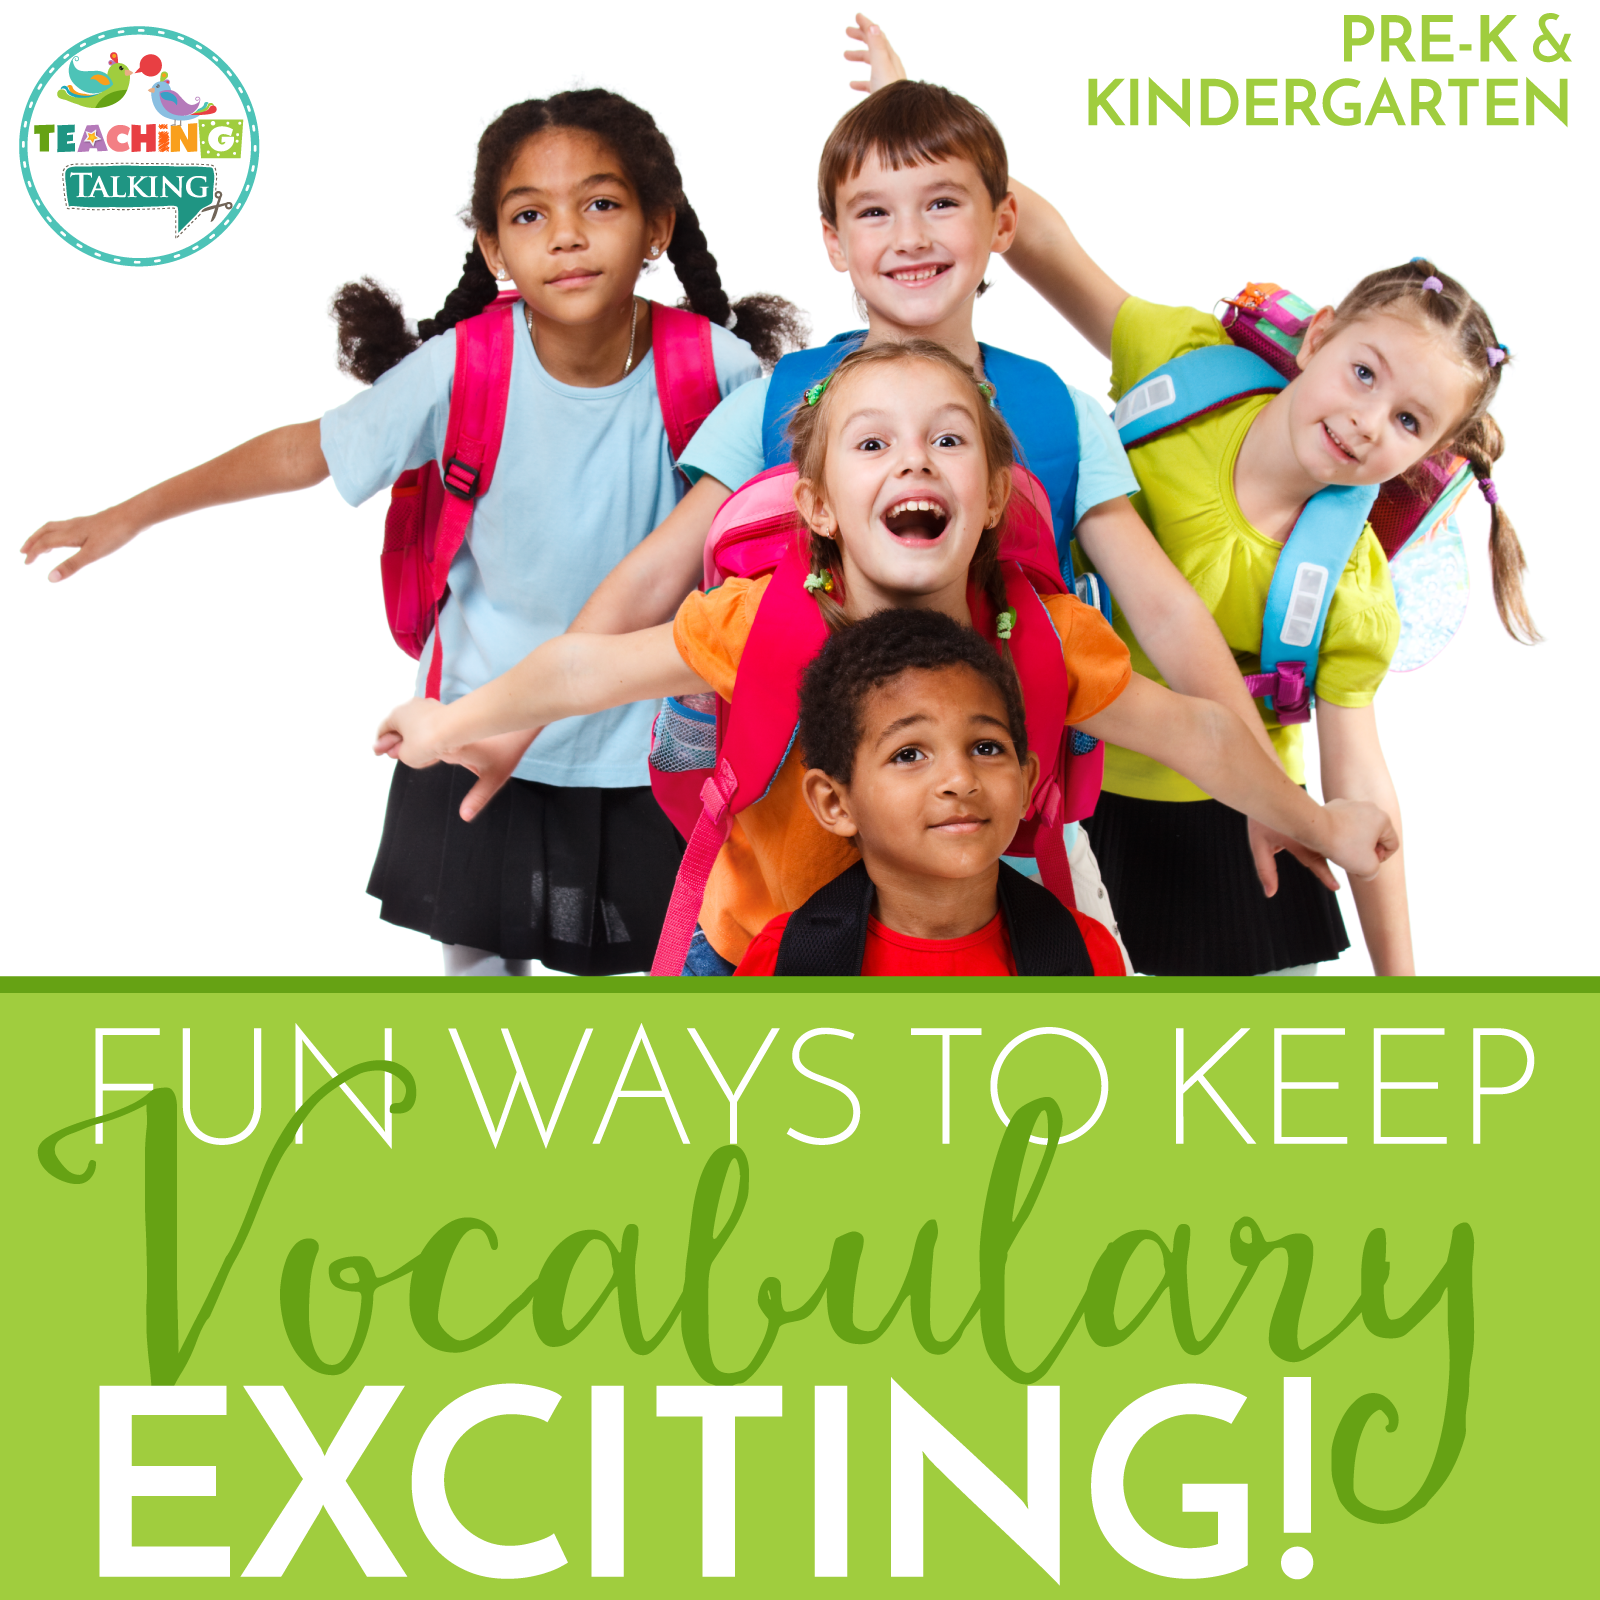 speech-therapy-vocabulary-games-for-pre-k-kindergarten-teaching-talking